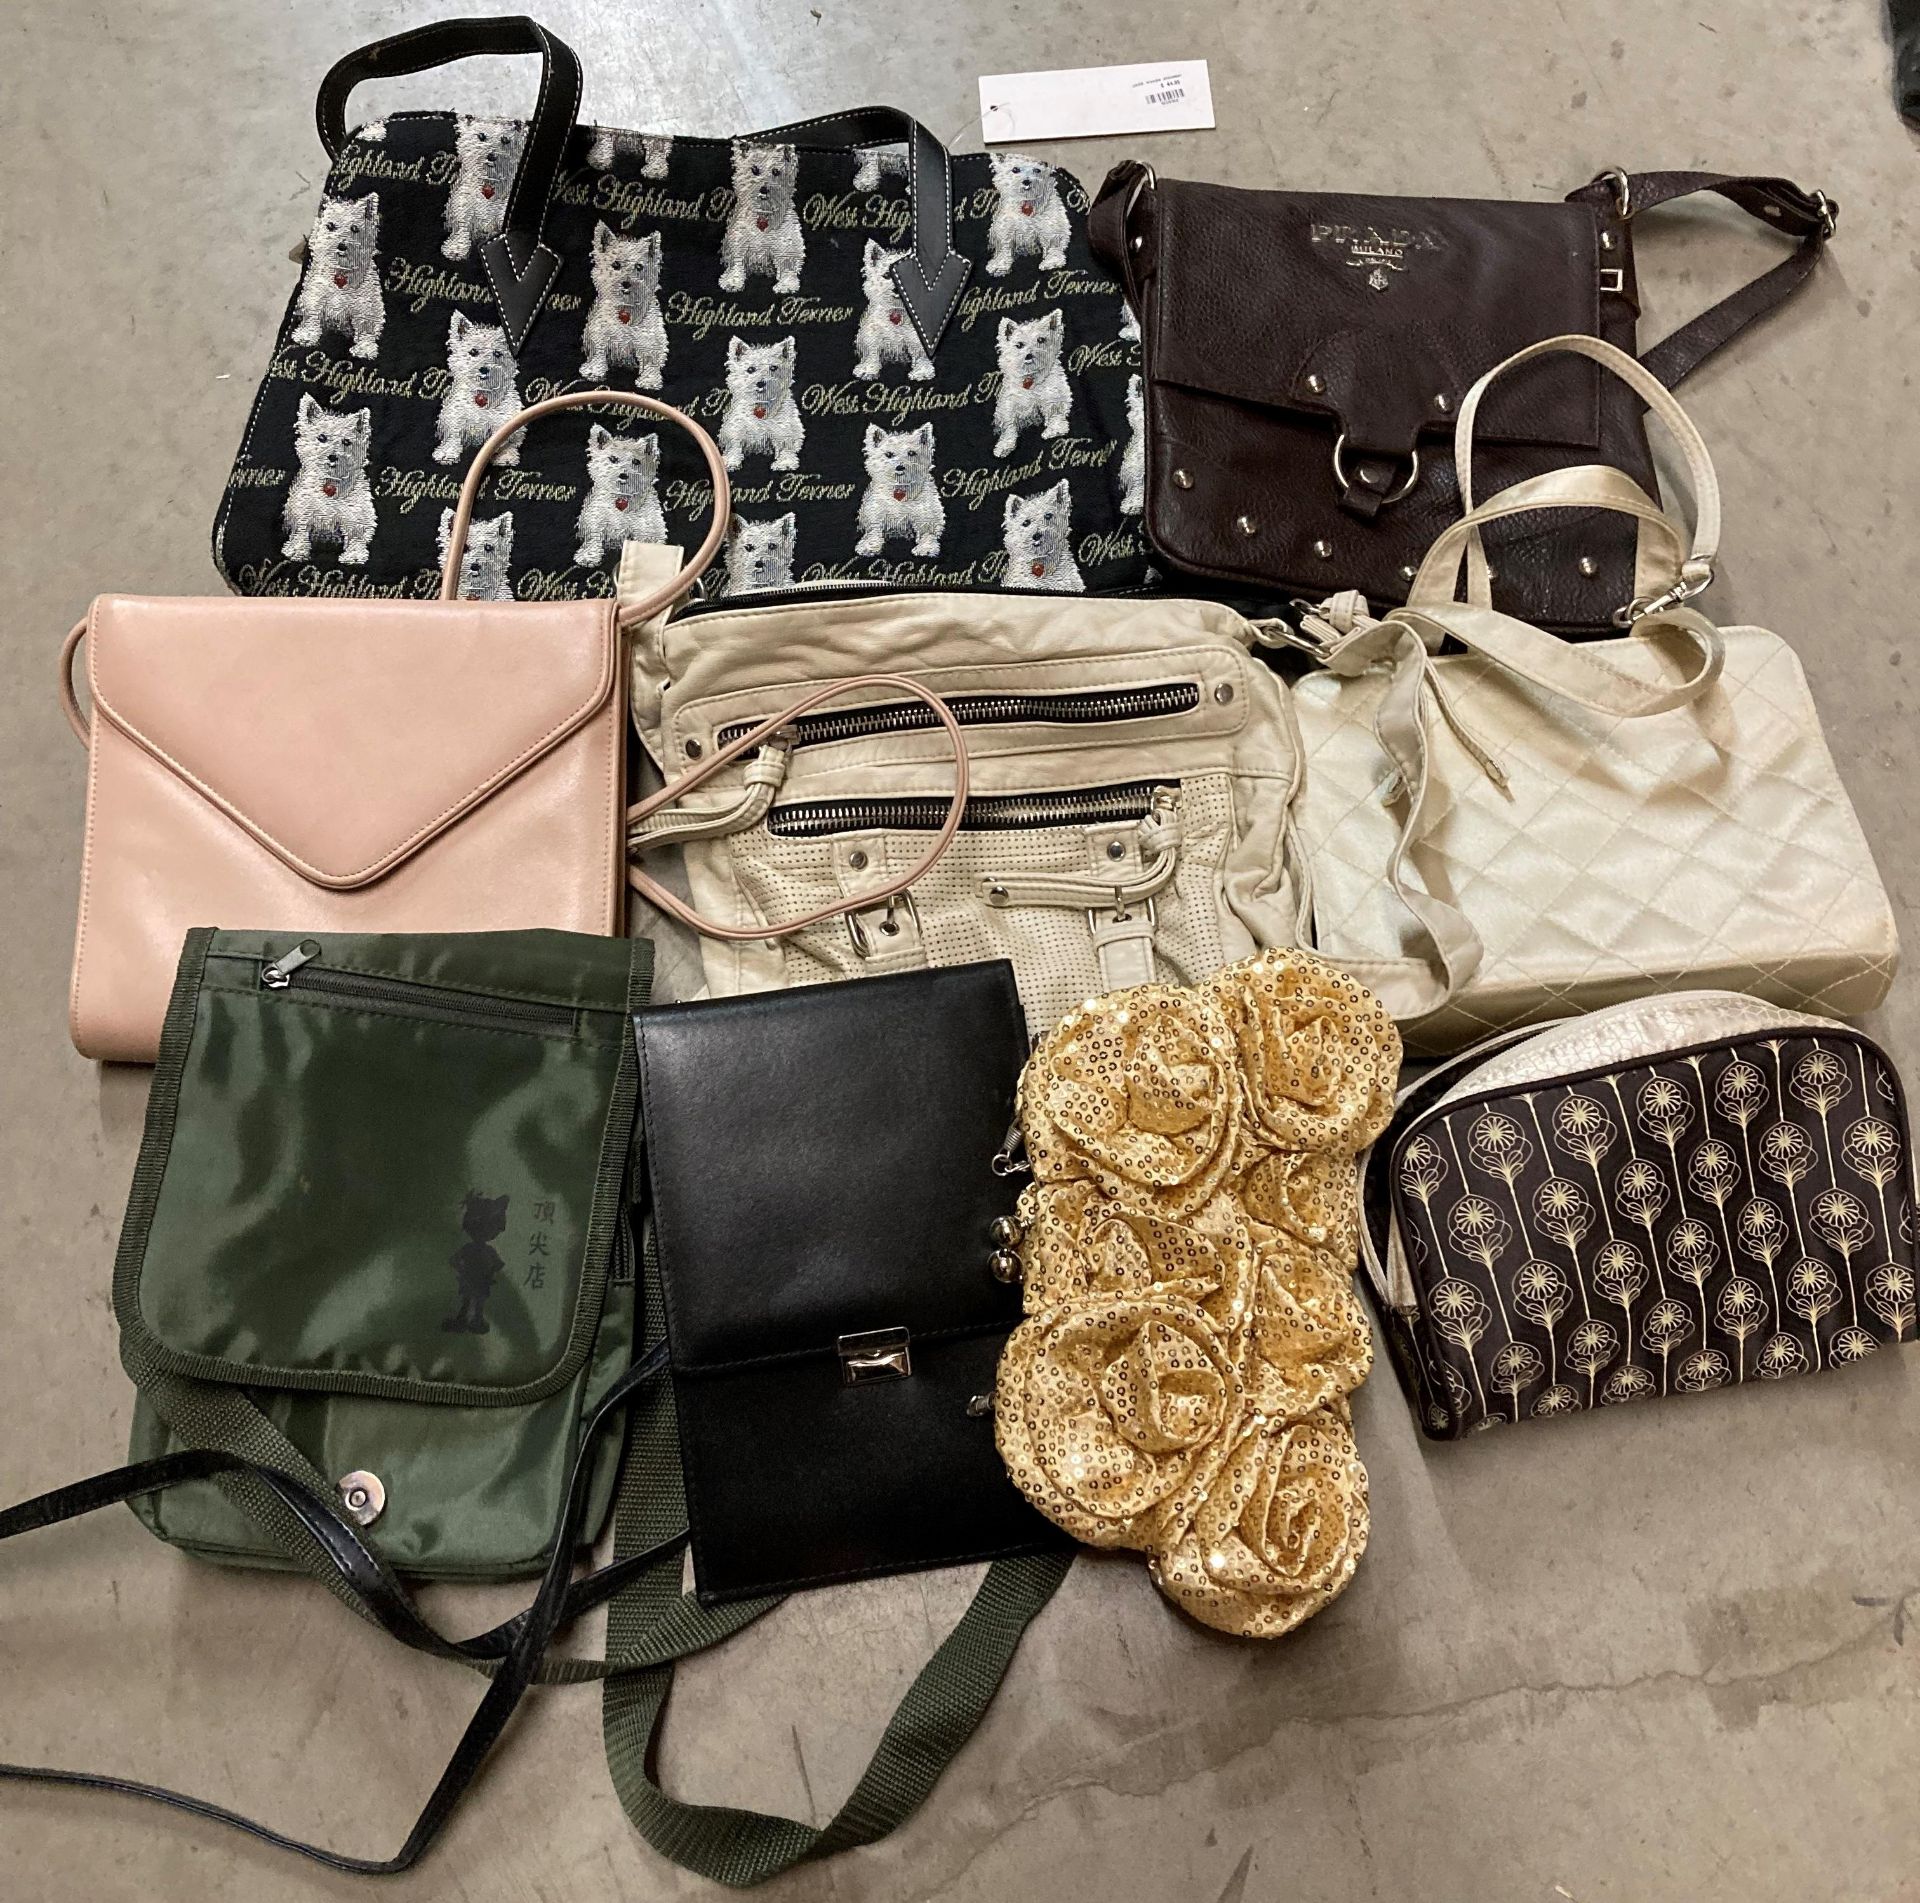 Contents to box - nine assorted handbags by Top Shop,